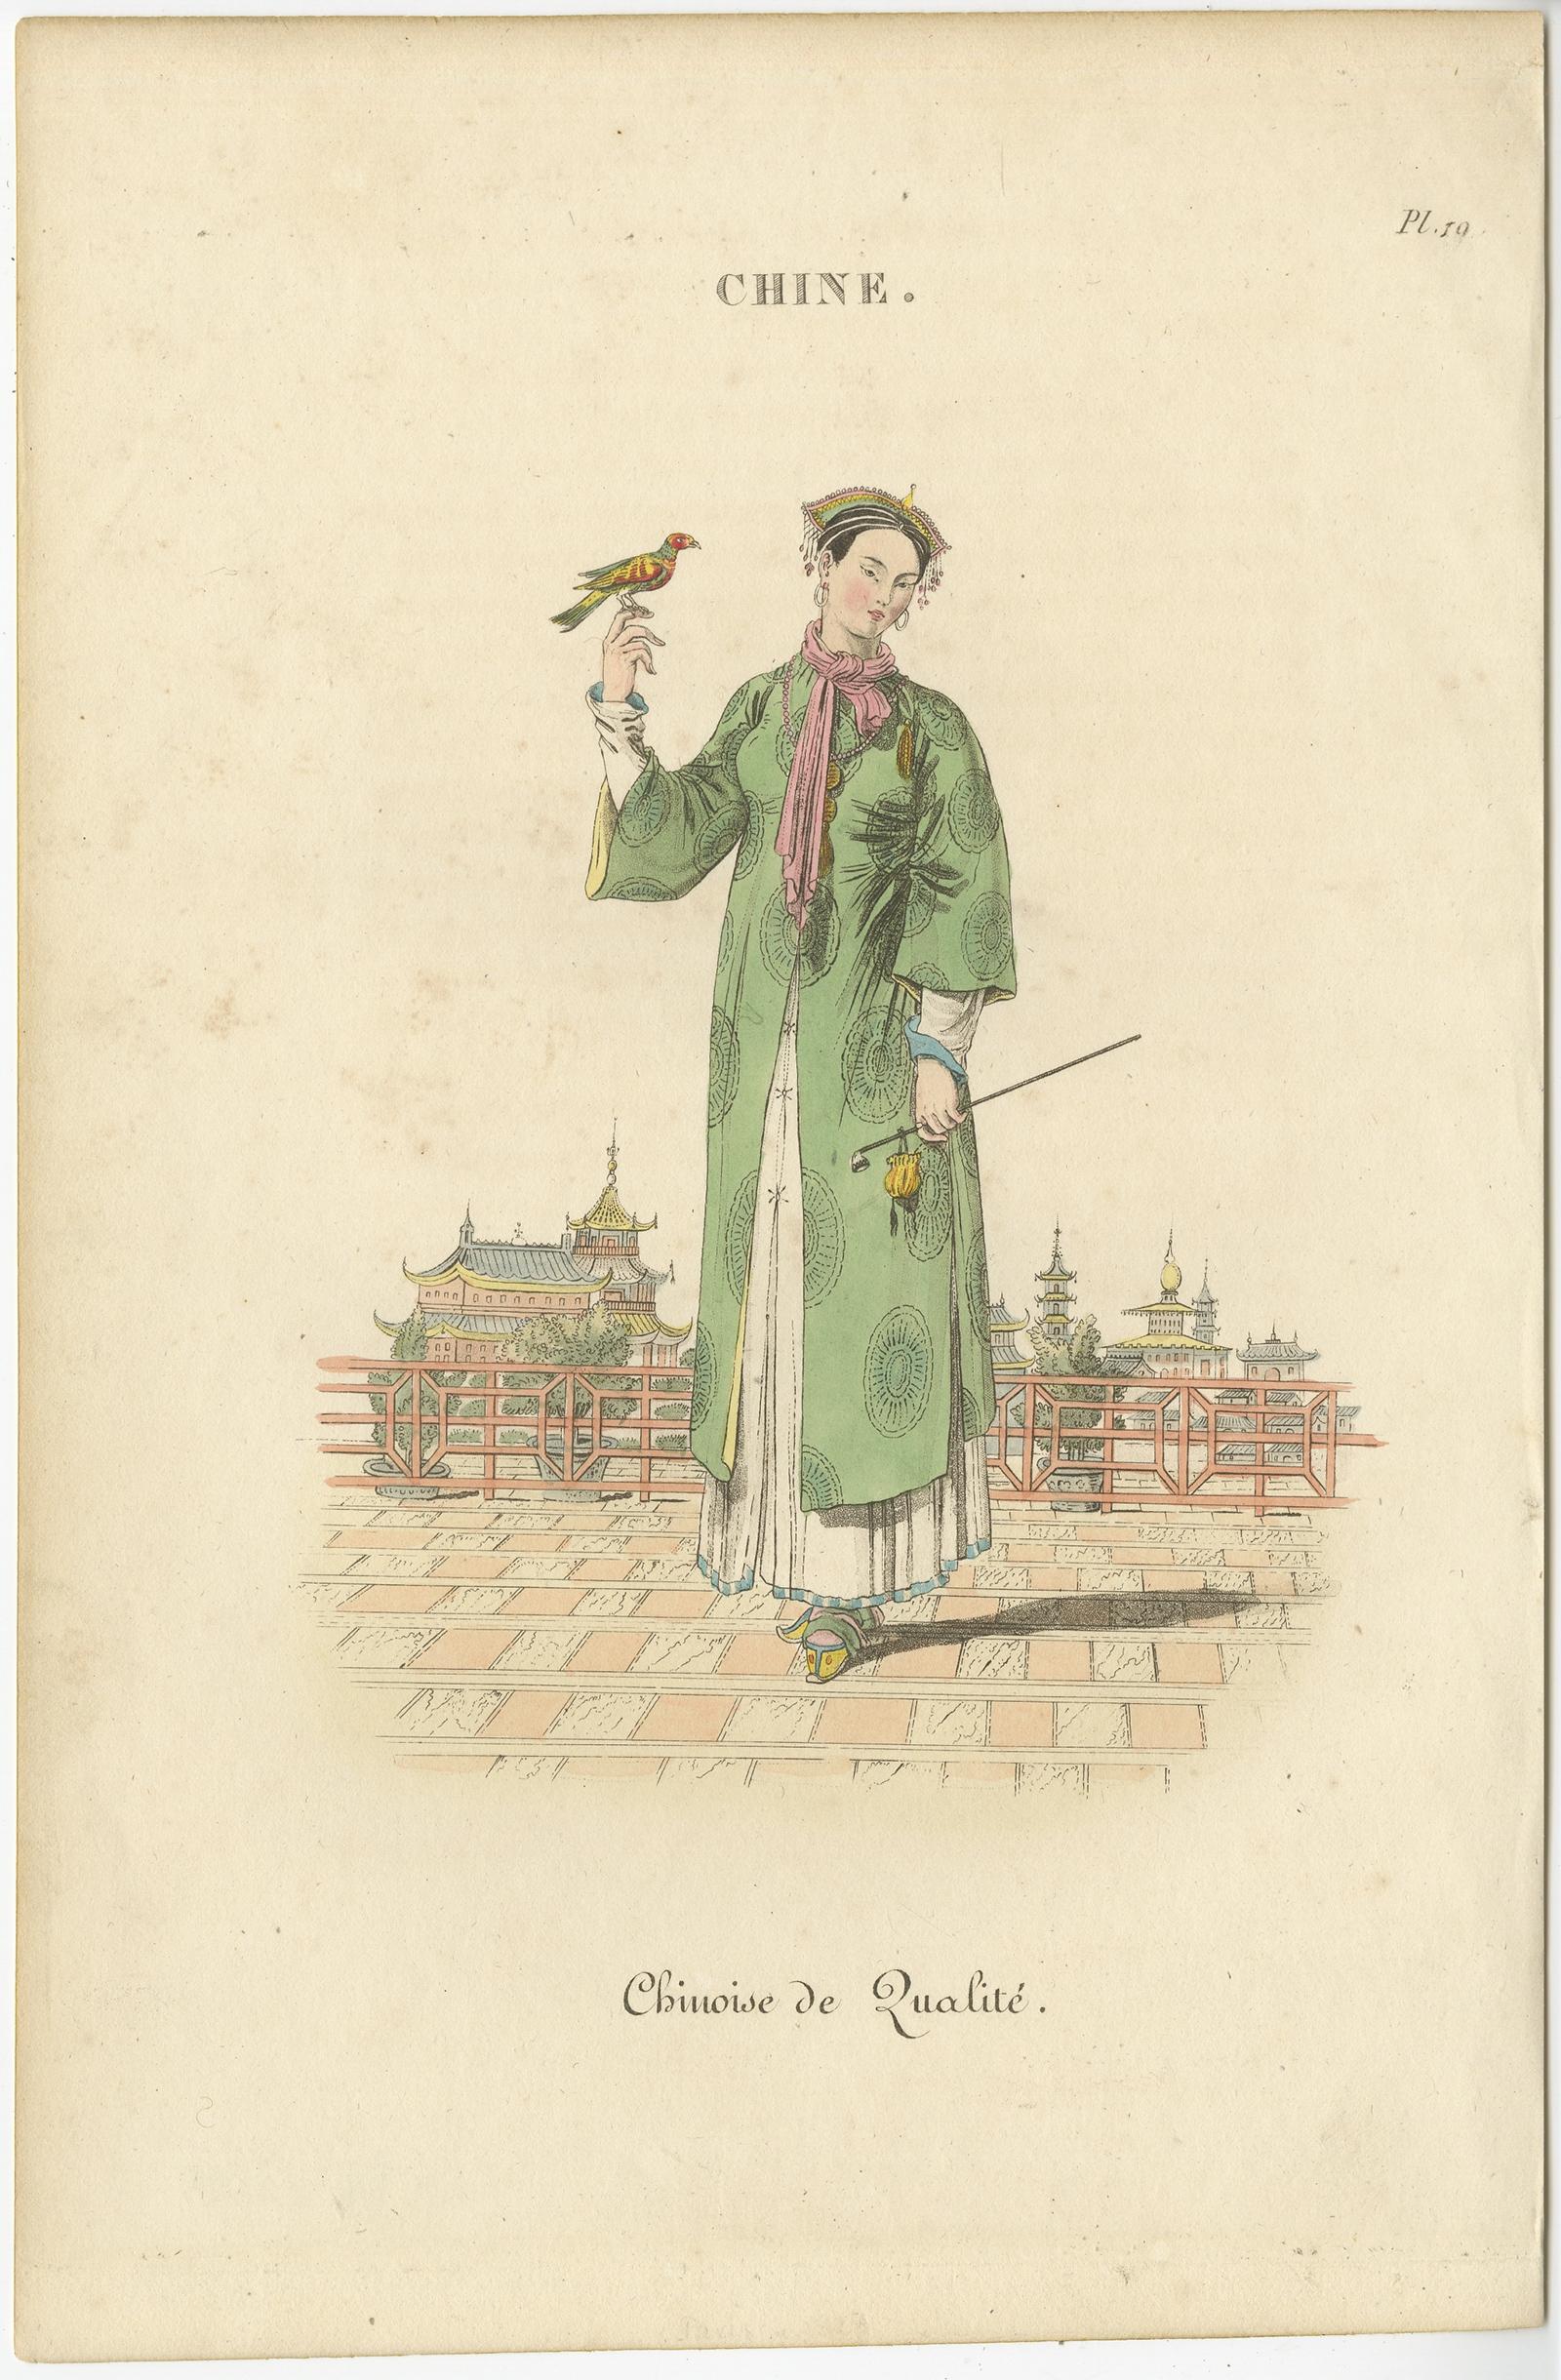 Antique print titled 'Chinoise de Qualité'. 

Old print of a Chinese lady holding a bird, China. Also shows pagodas. Source unknown, to be determined. 

Artists and Engravers: Anonymous.